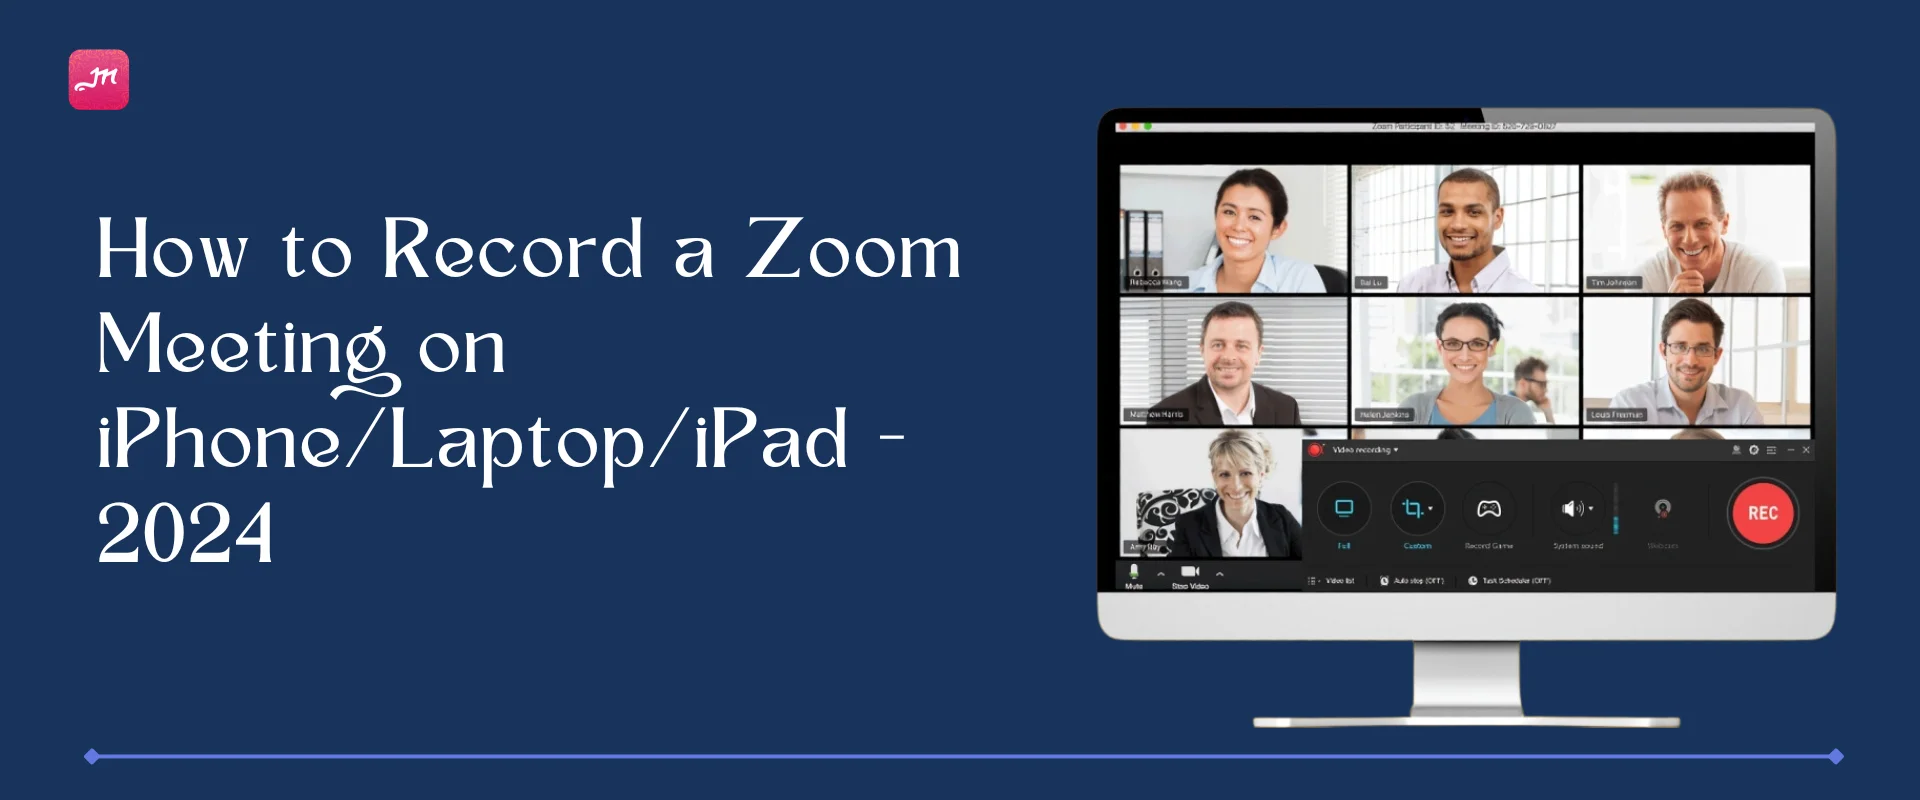 How to Record a Zoom Meeting on iPhone/Laptop/iPad – 2024